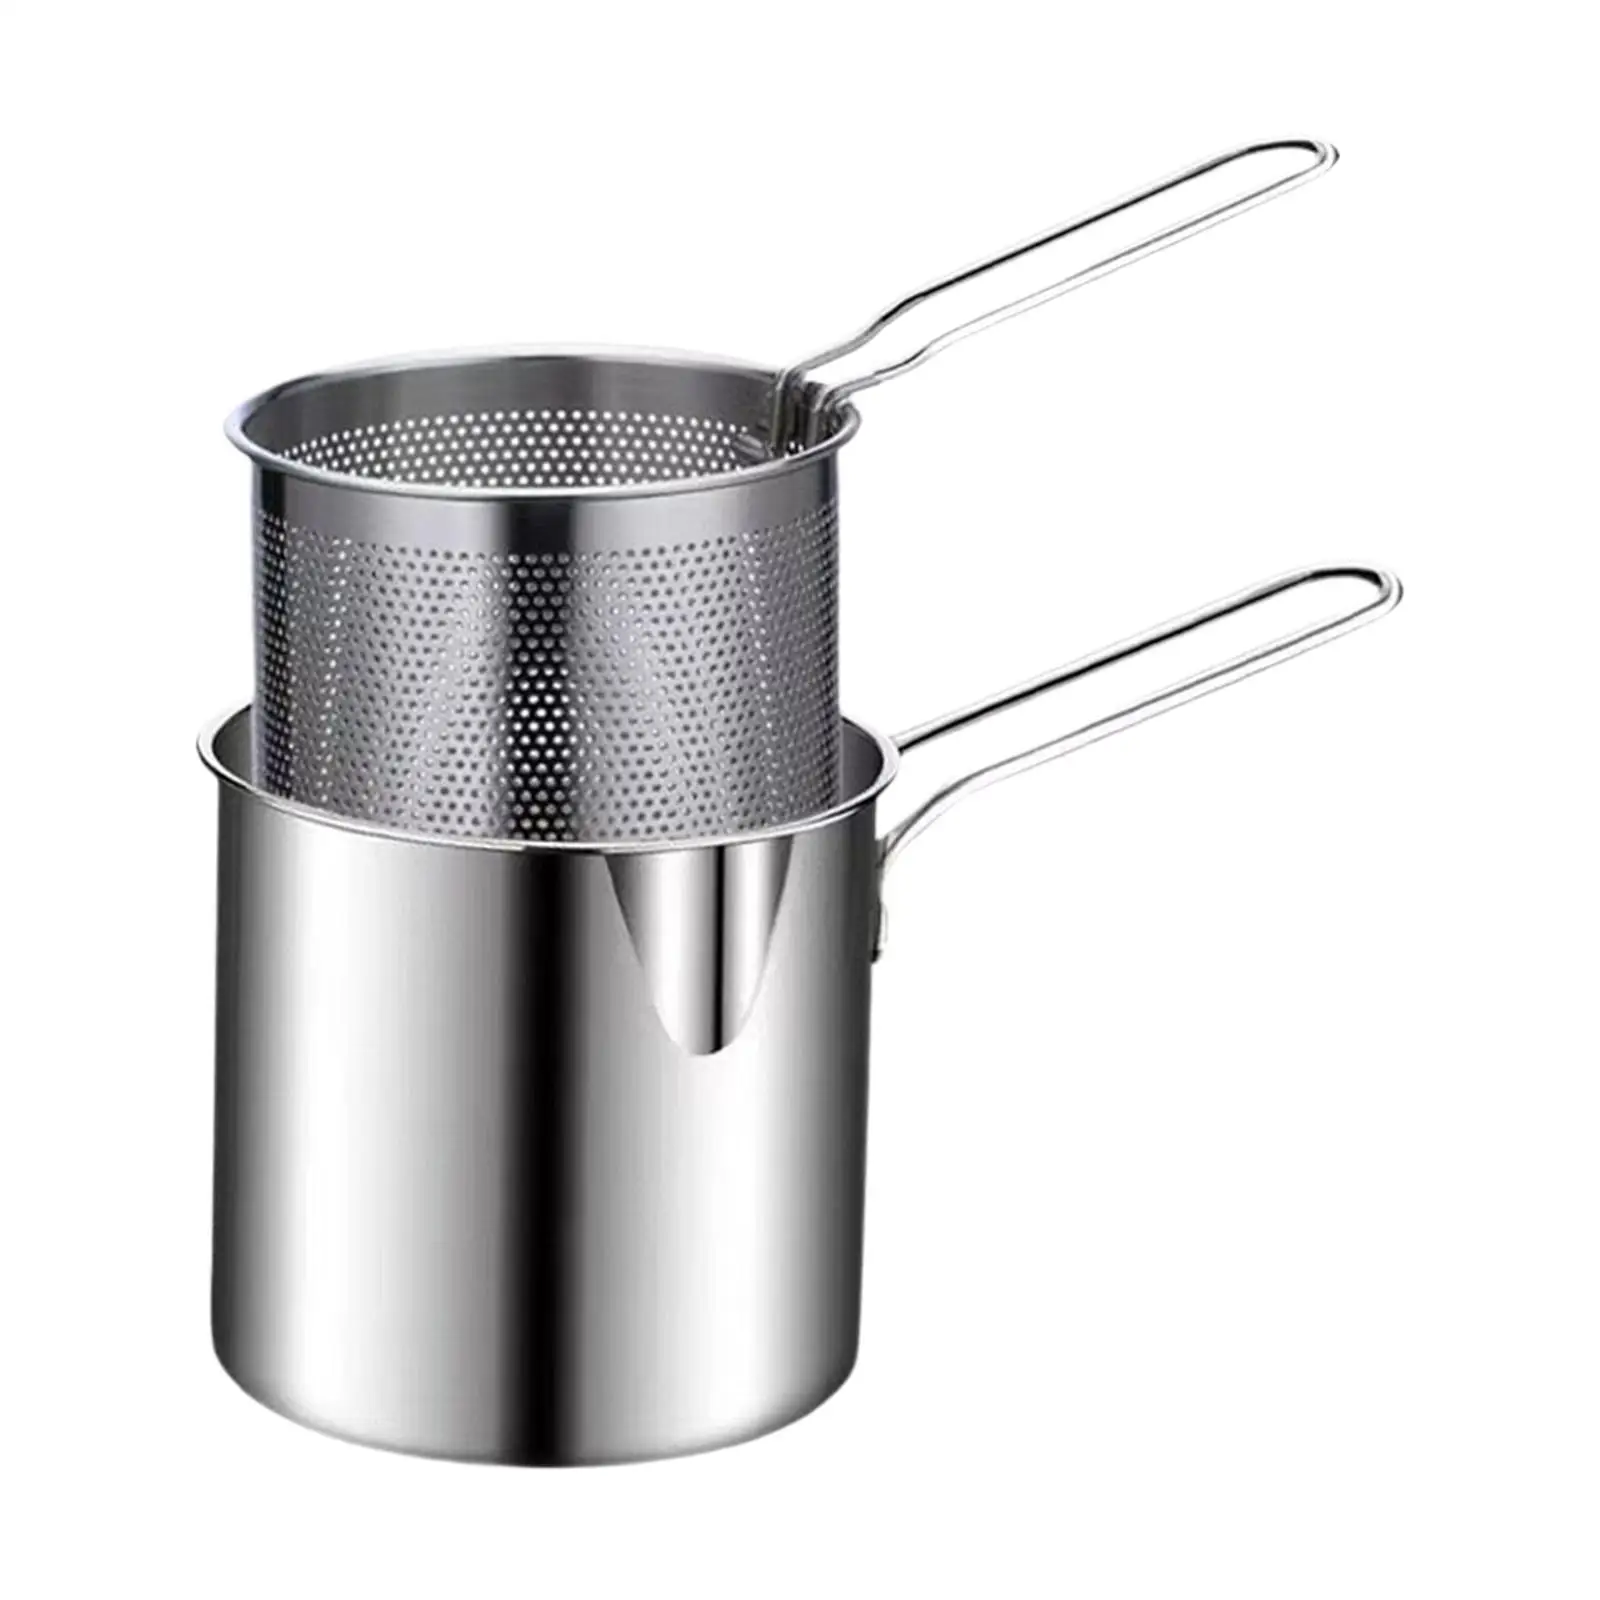 Stainless Steel Deep Frying Pot with Basket Detachable for party Chicken Cooking Tools